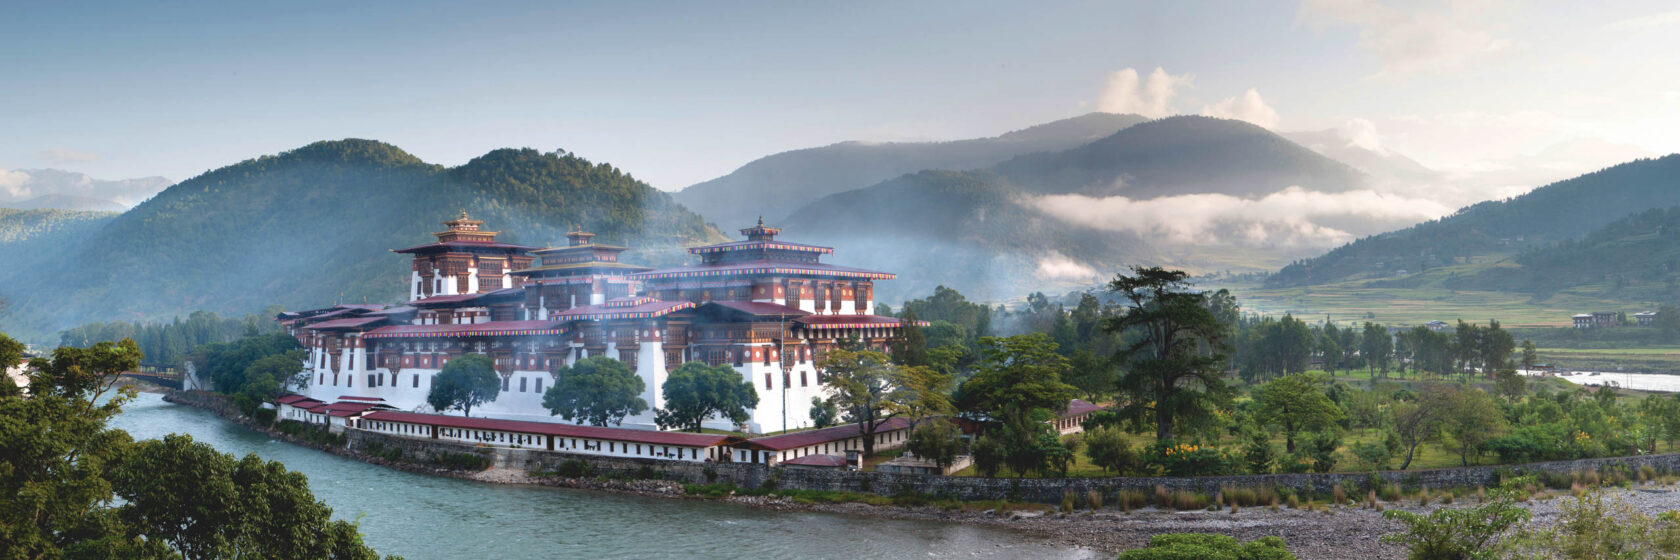 Misty dawn view of the Punakha Dzong located at the junction of the Mo Chhu Mother River and Pho Chhu Father River in the Punakha Valley, Bhutan.